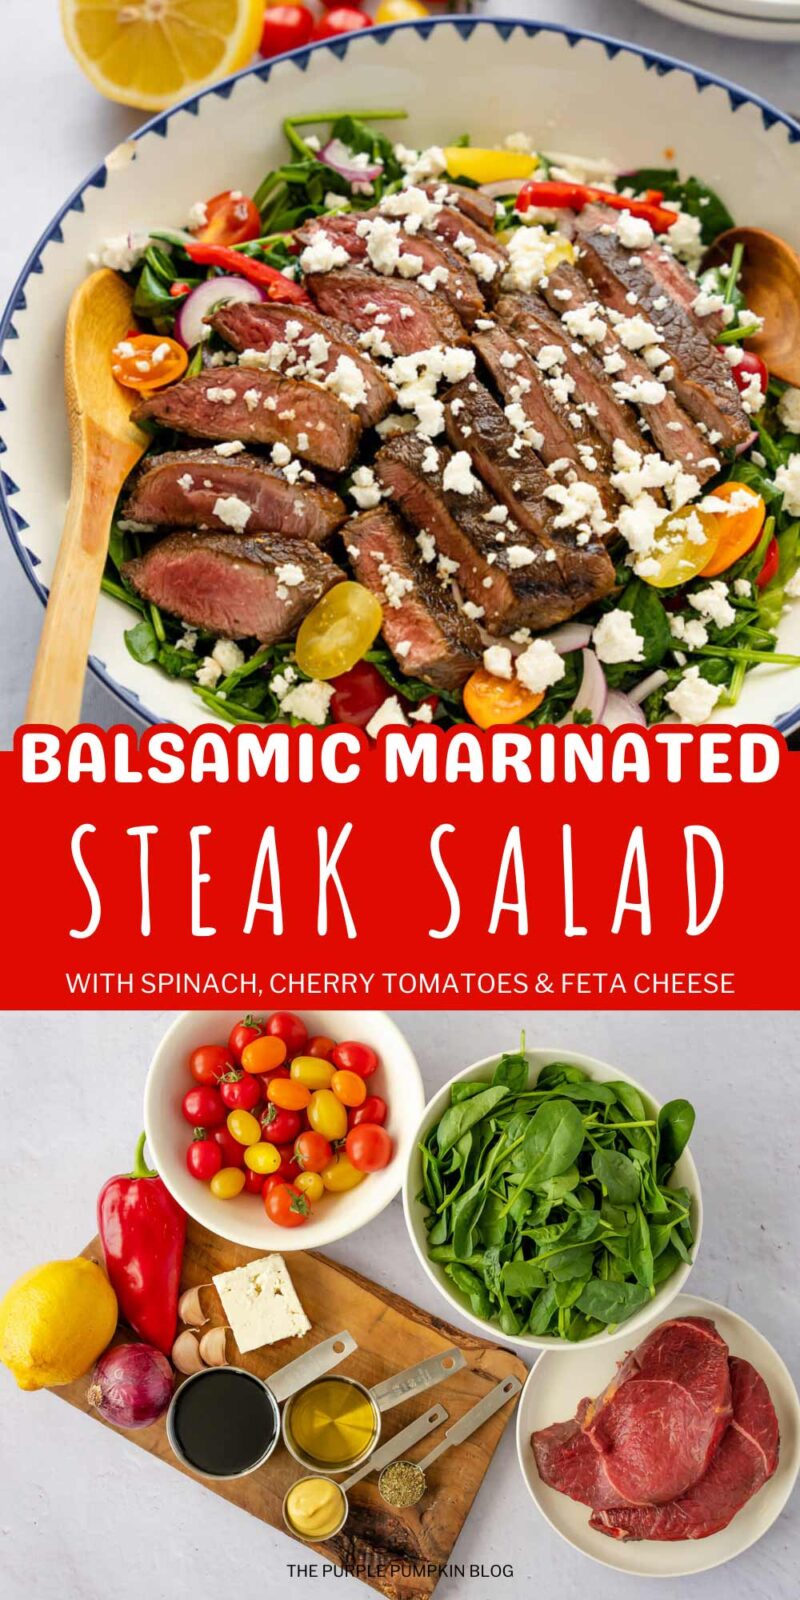 Balsamic Marinated Balsamic Steak Salad with Spinach, Cherry Tomatoes & Feta Cheese